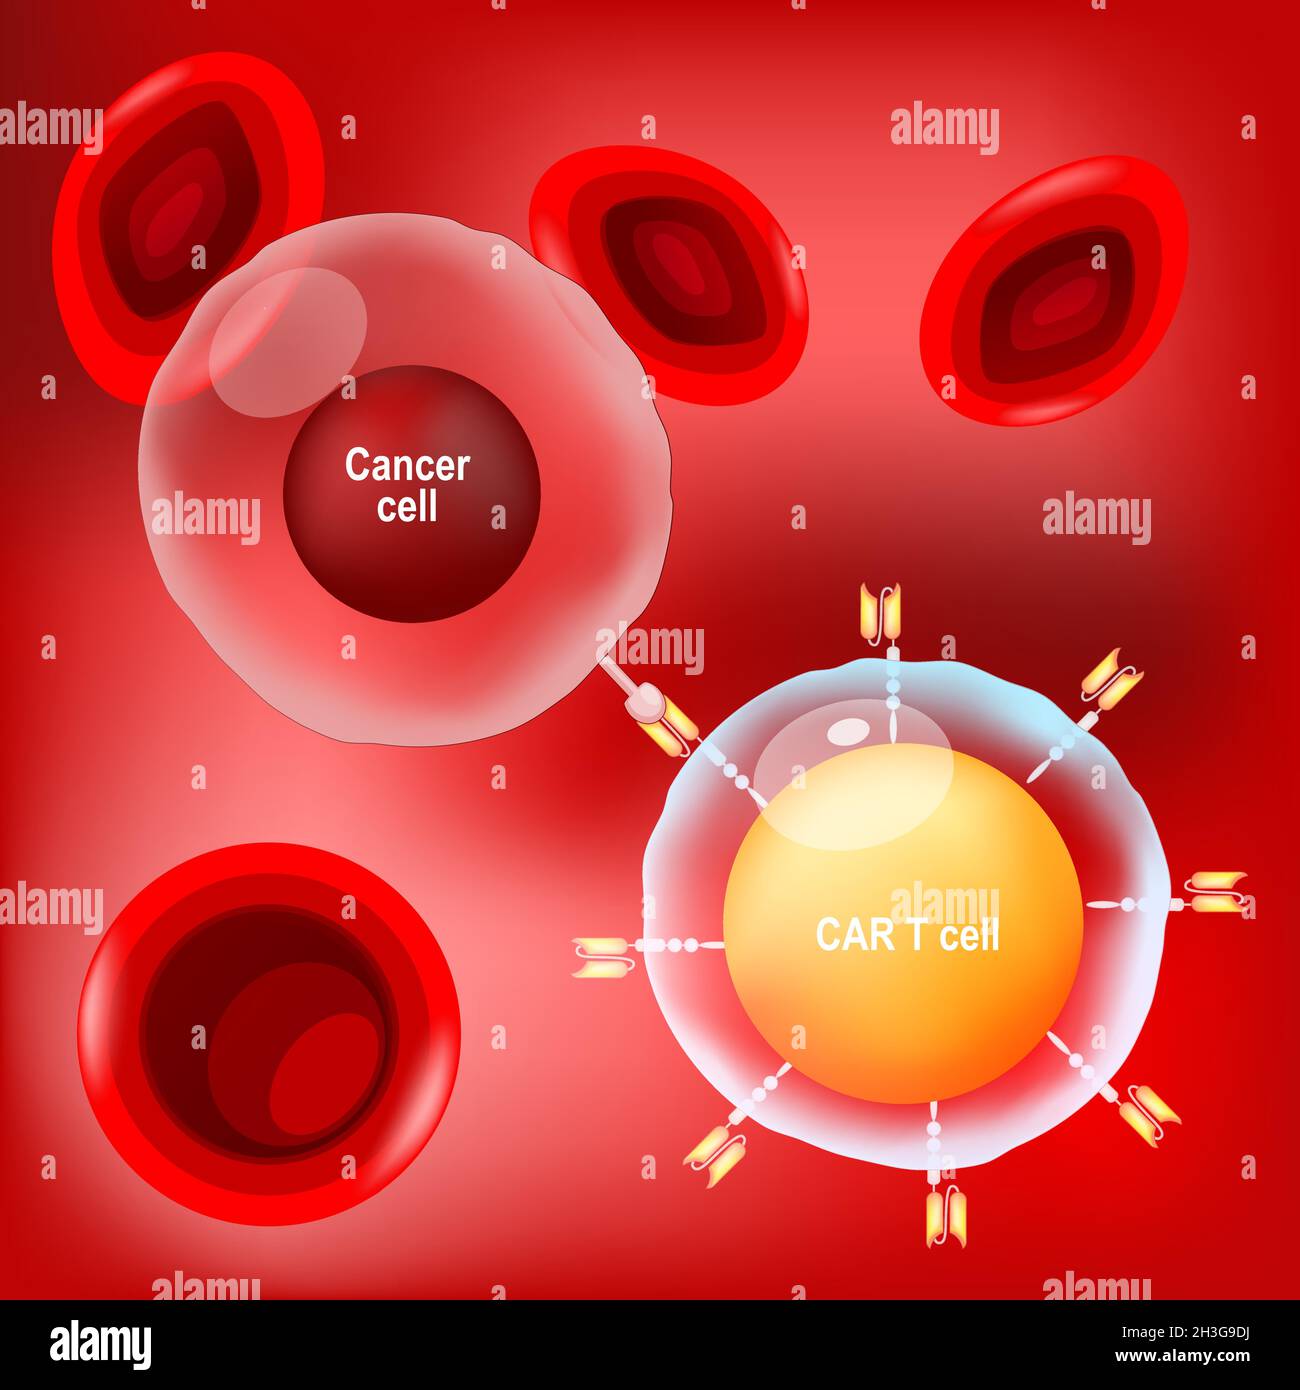 Cancer cell, CAR t-cell (lymphocyte) and red blood cells on red background. vector Poster about immunotherapy or chemotherapy cancer. Stock Vector